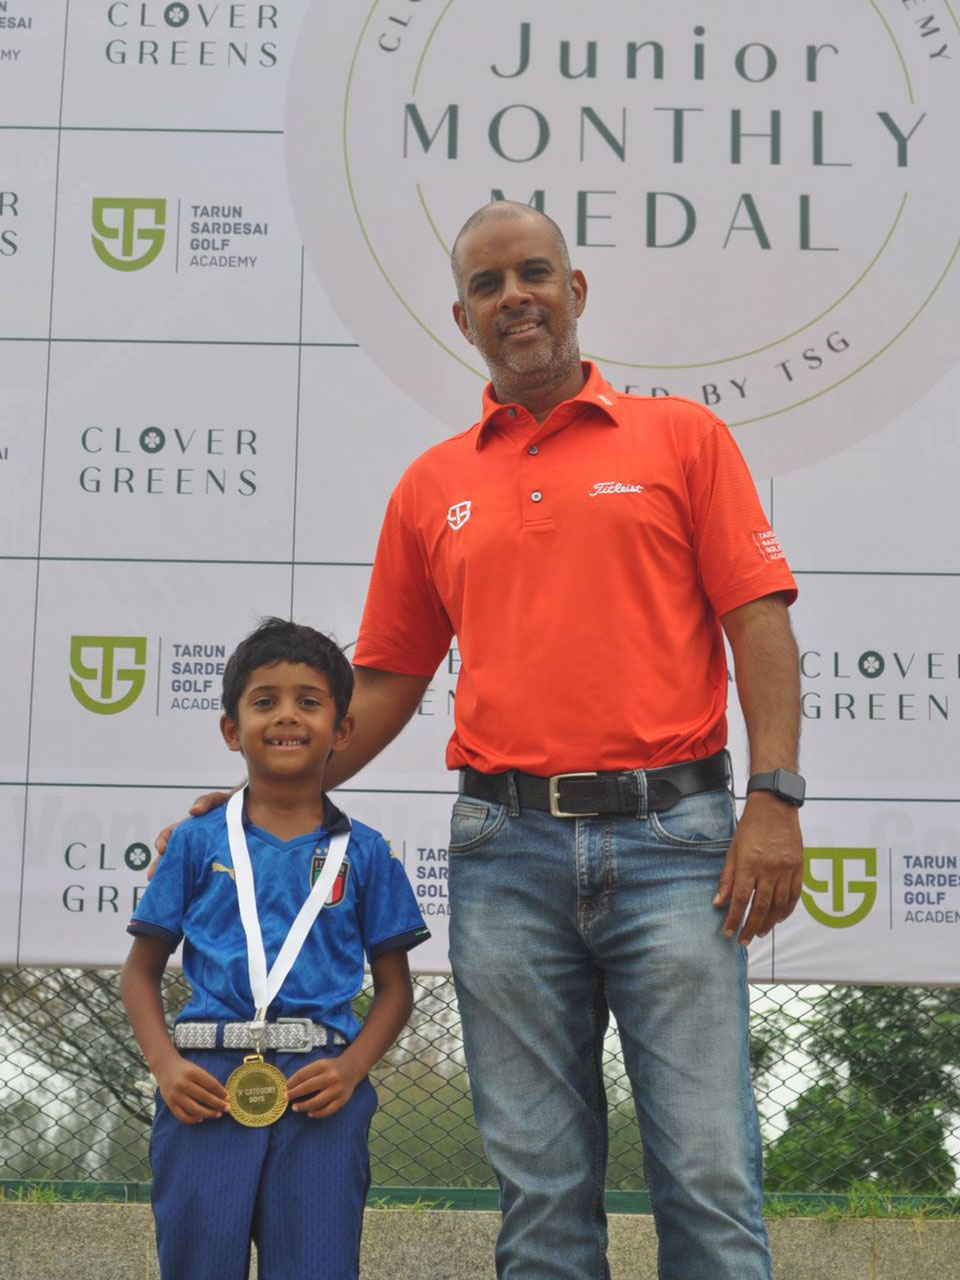  Shinav Santosh finished as runner up in the 'B' Boys category at CIS Interschool Golf Championship held at Prestige Augusta Golf Course in Bangalore.